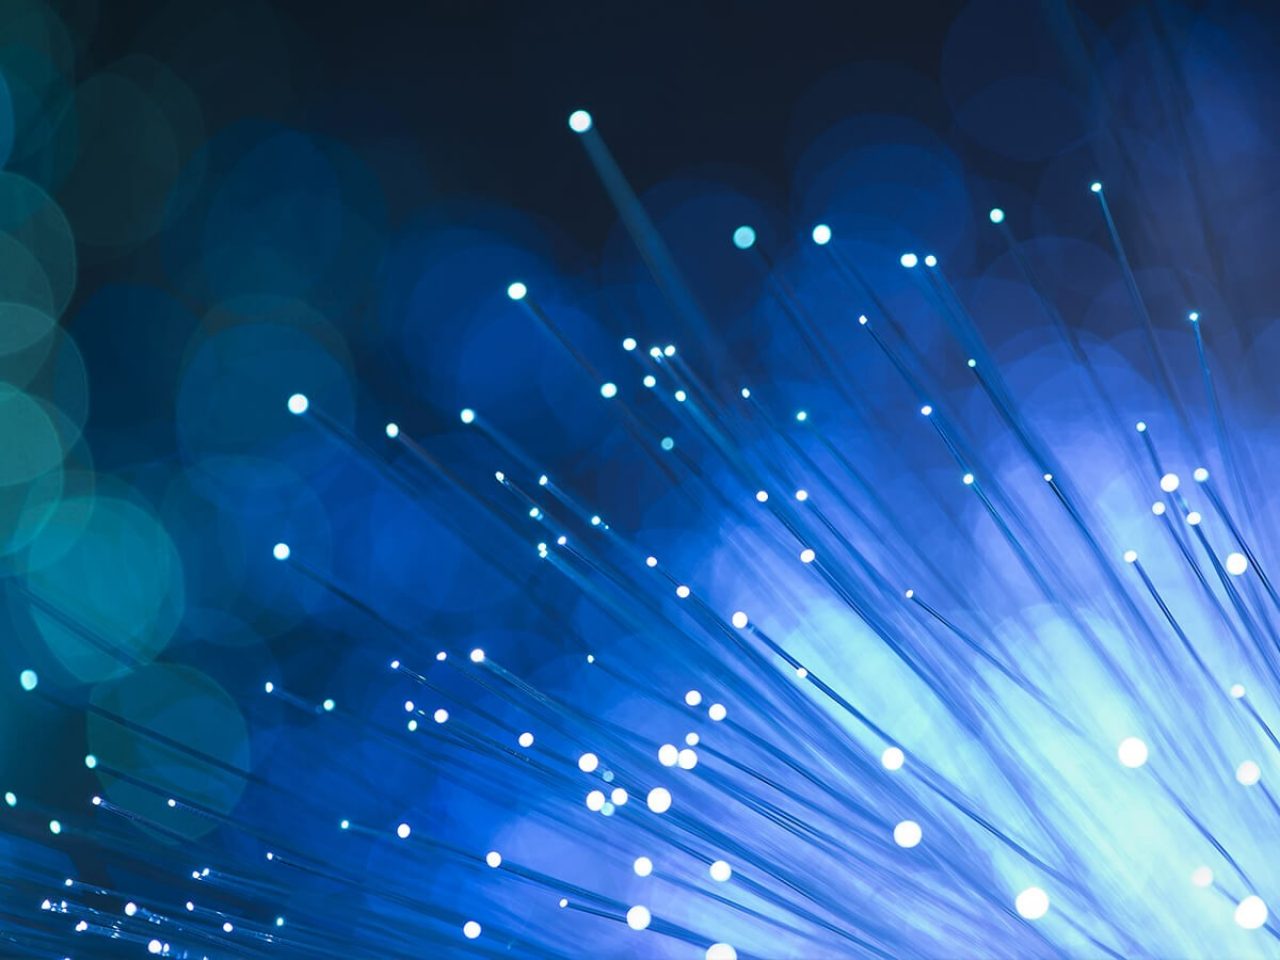 A single optical fiber link can carry more than 150 terabits of data per second.